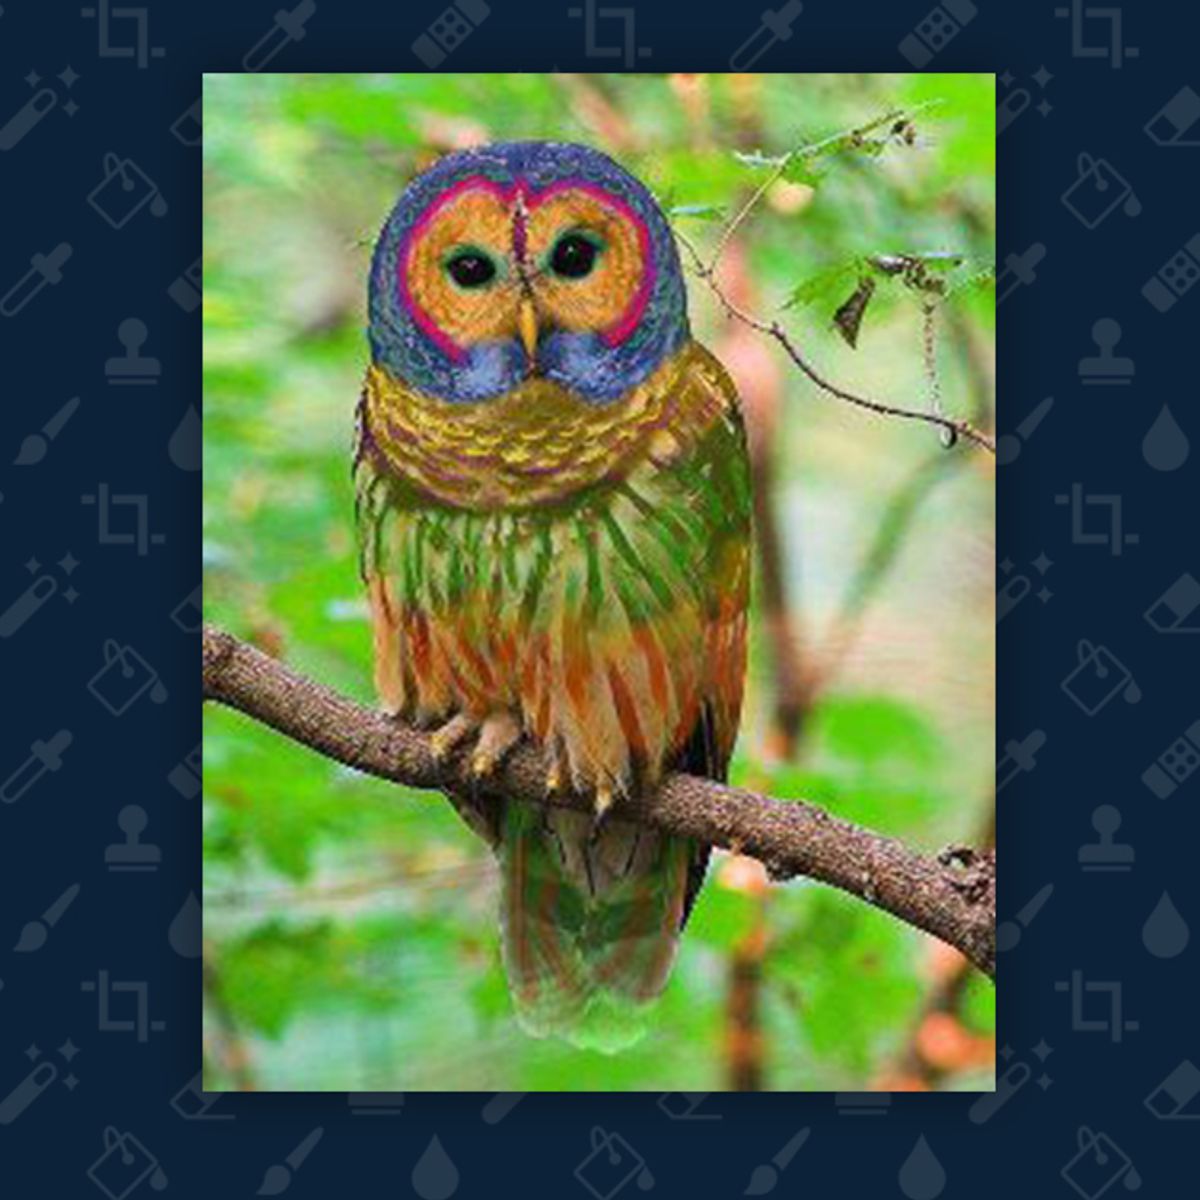 Is This a Photograph of a Rainbow Owl? 